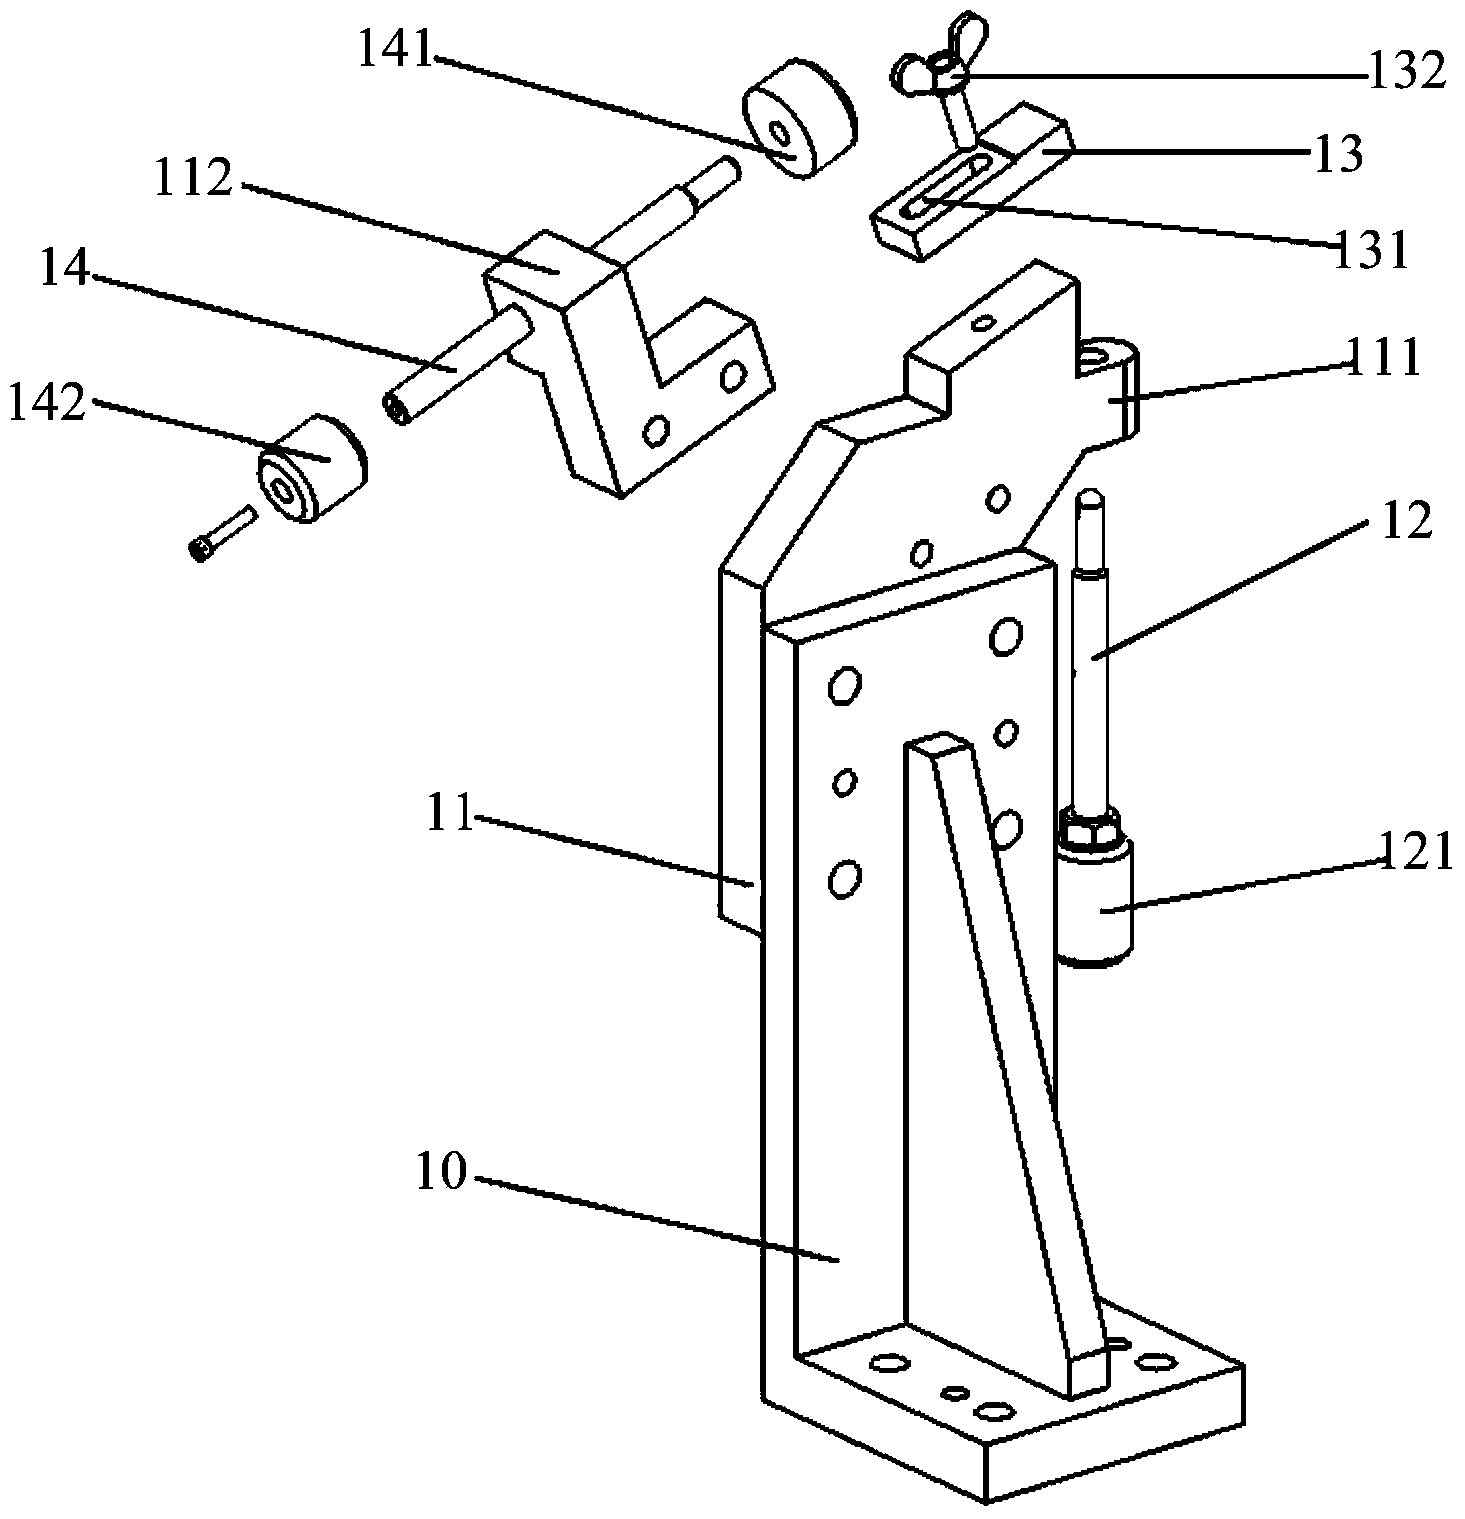 Gauge positioning and clamping device